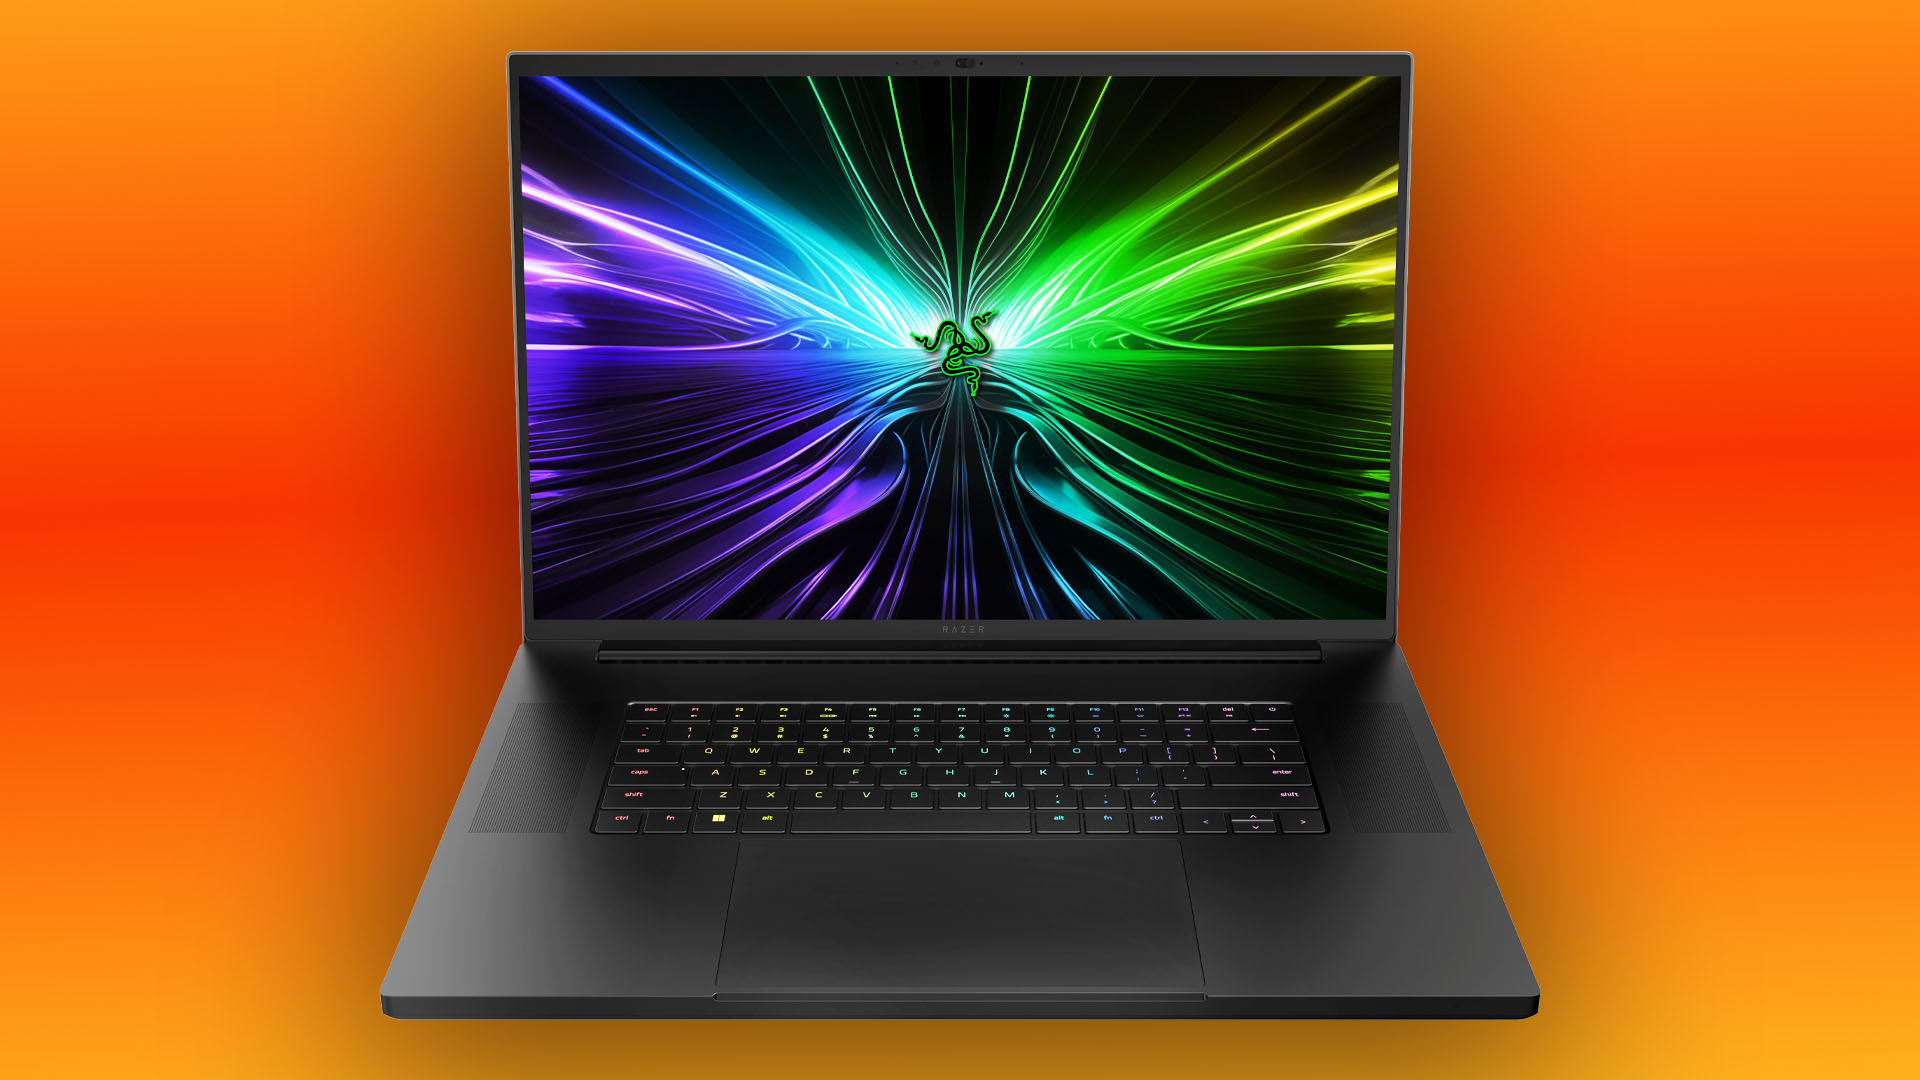 Razer's Blade 18 just got upgraded, and the screen looks amazing